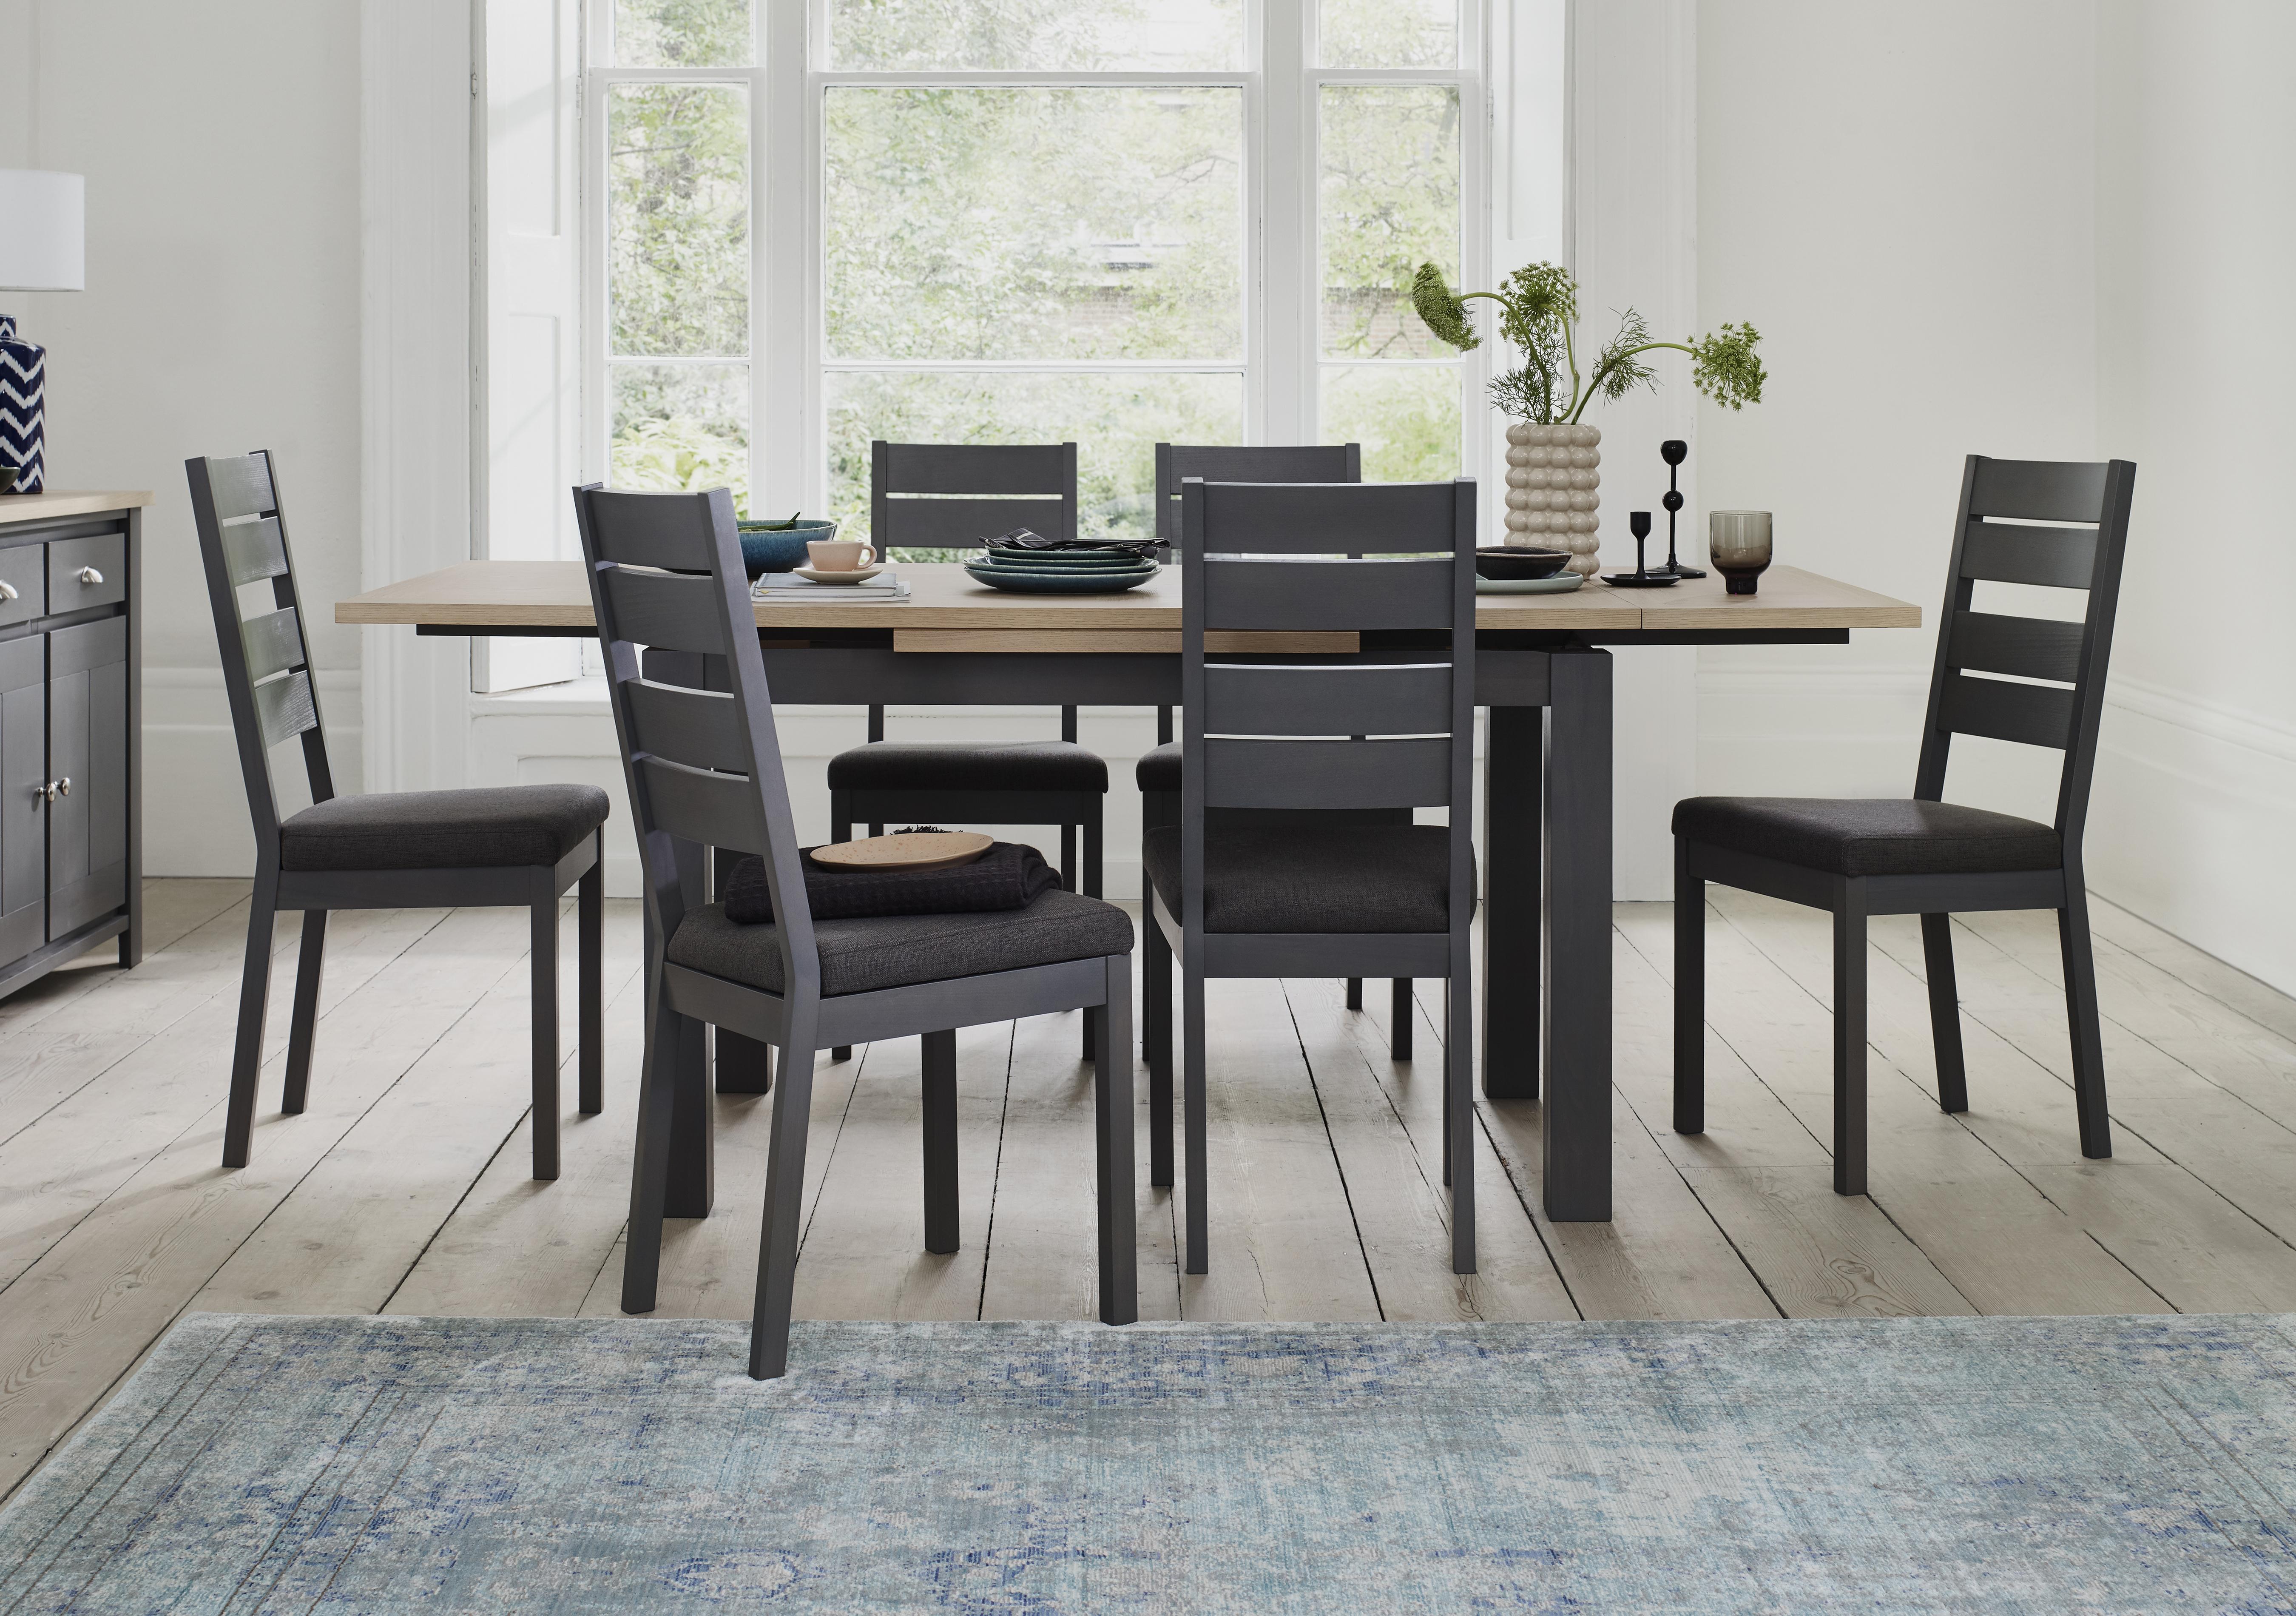 Compact Dining Solutions Furniture Village Furniture Village